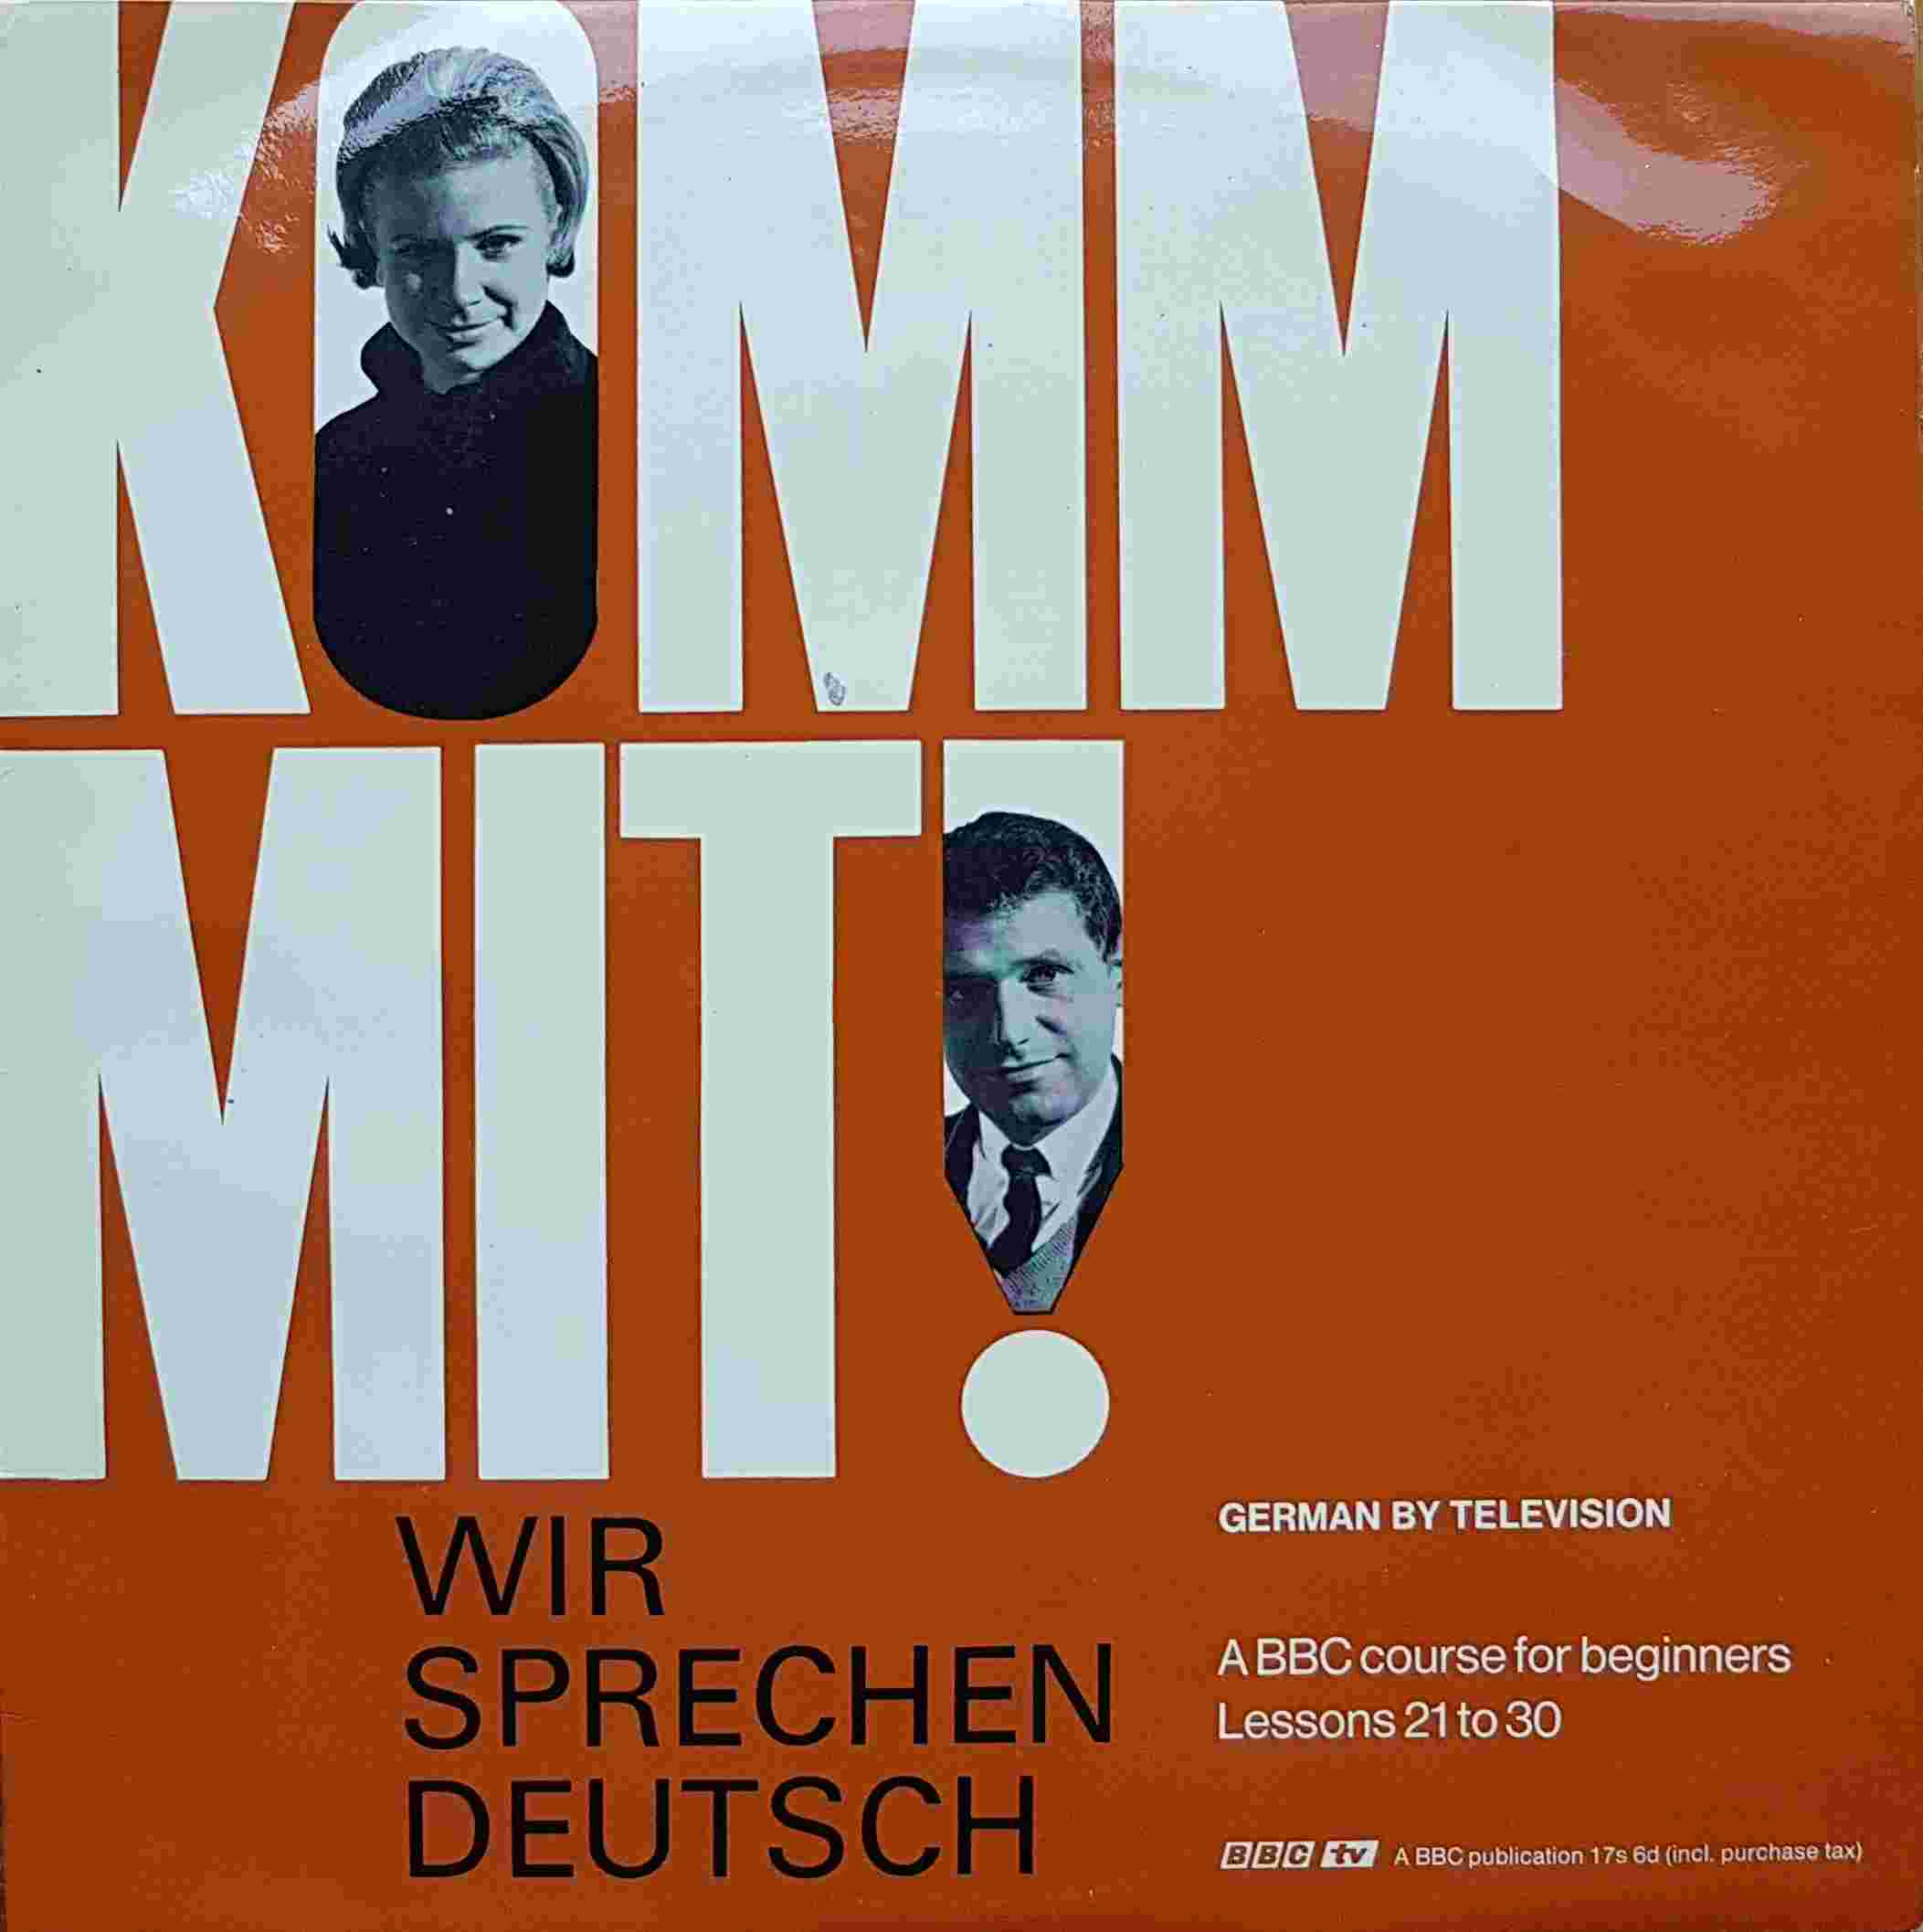 Picture of Komm mit! Wir sprechen Deutsch - A BBC course for beginners lessons 21 - 30 by artist John L. M. Trim / Frank Kuna from the BBC albums - Records and Tapes library